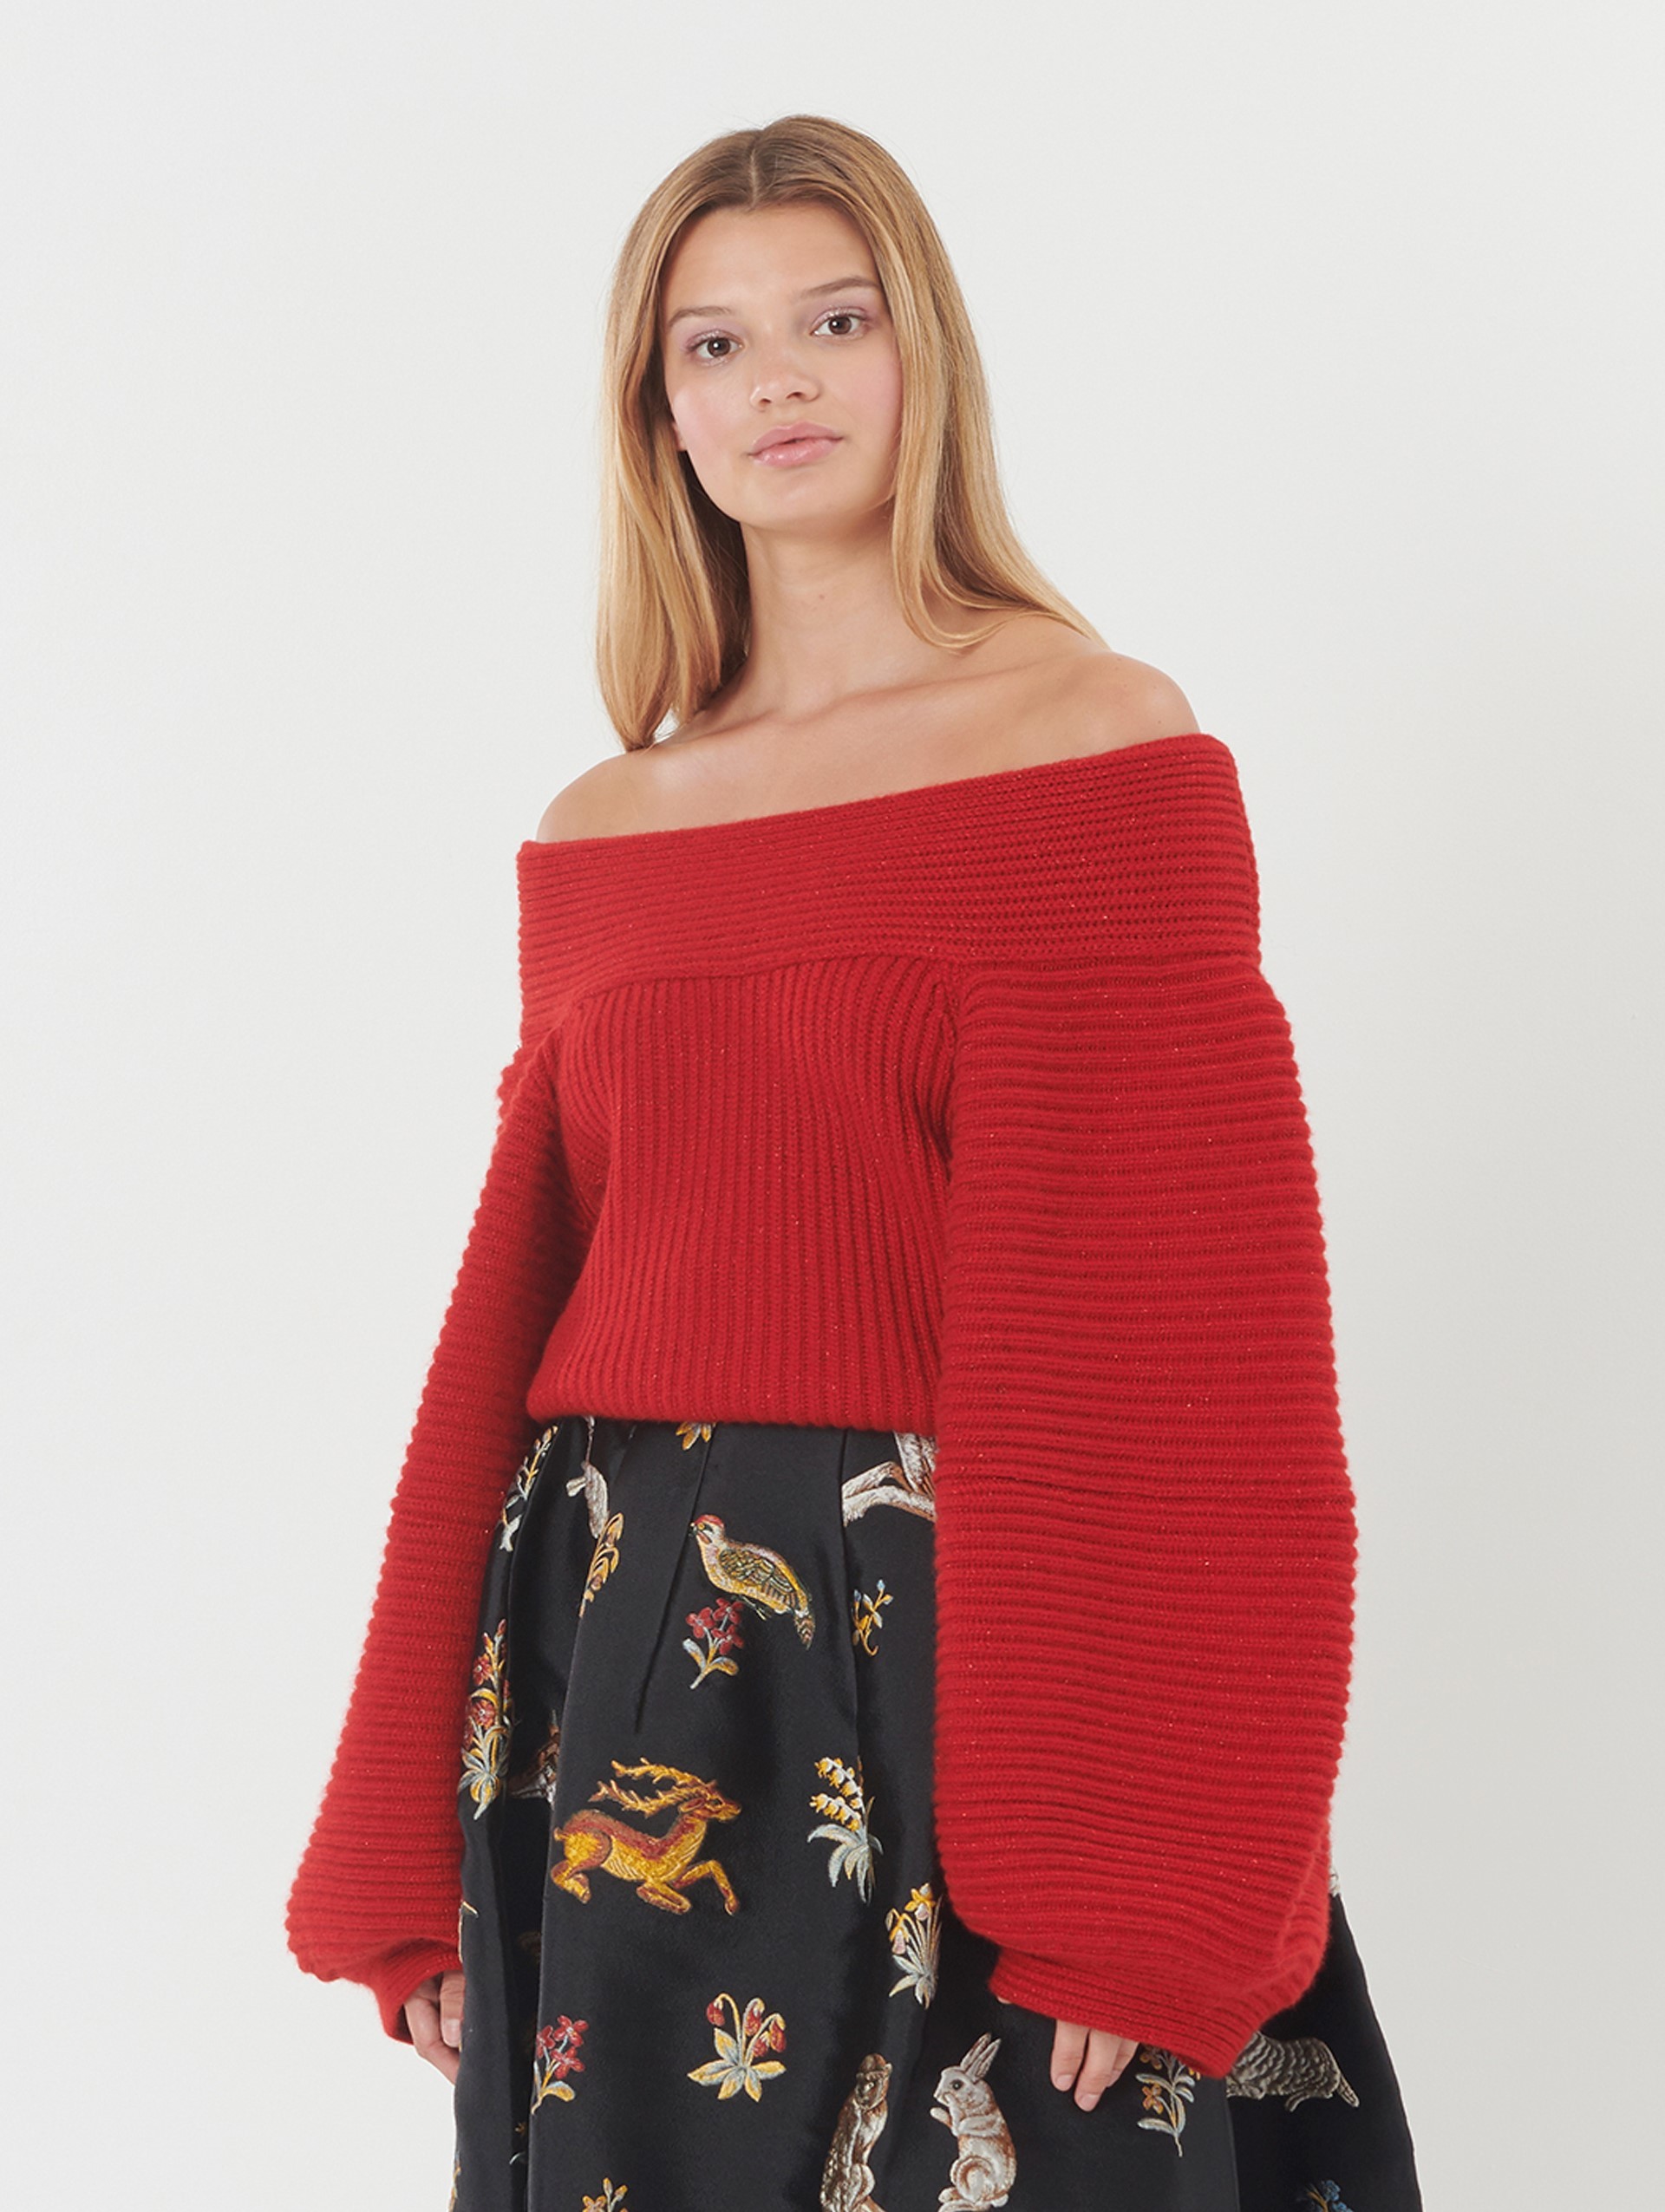 Fall Sweaters: Finding the Perfect Look for a Night on the Town Oscar de la Renta